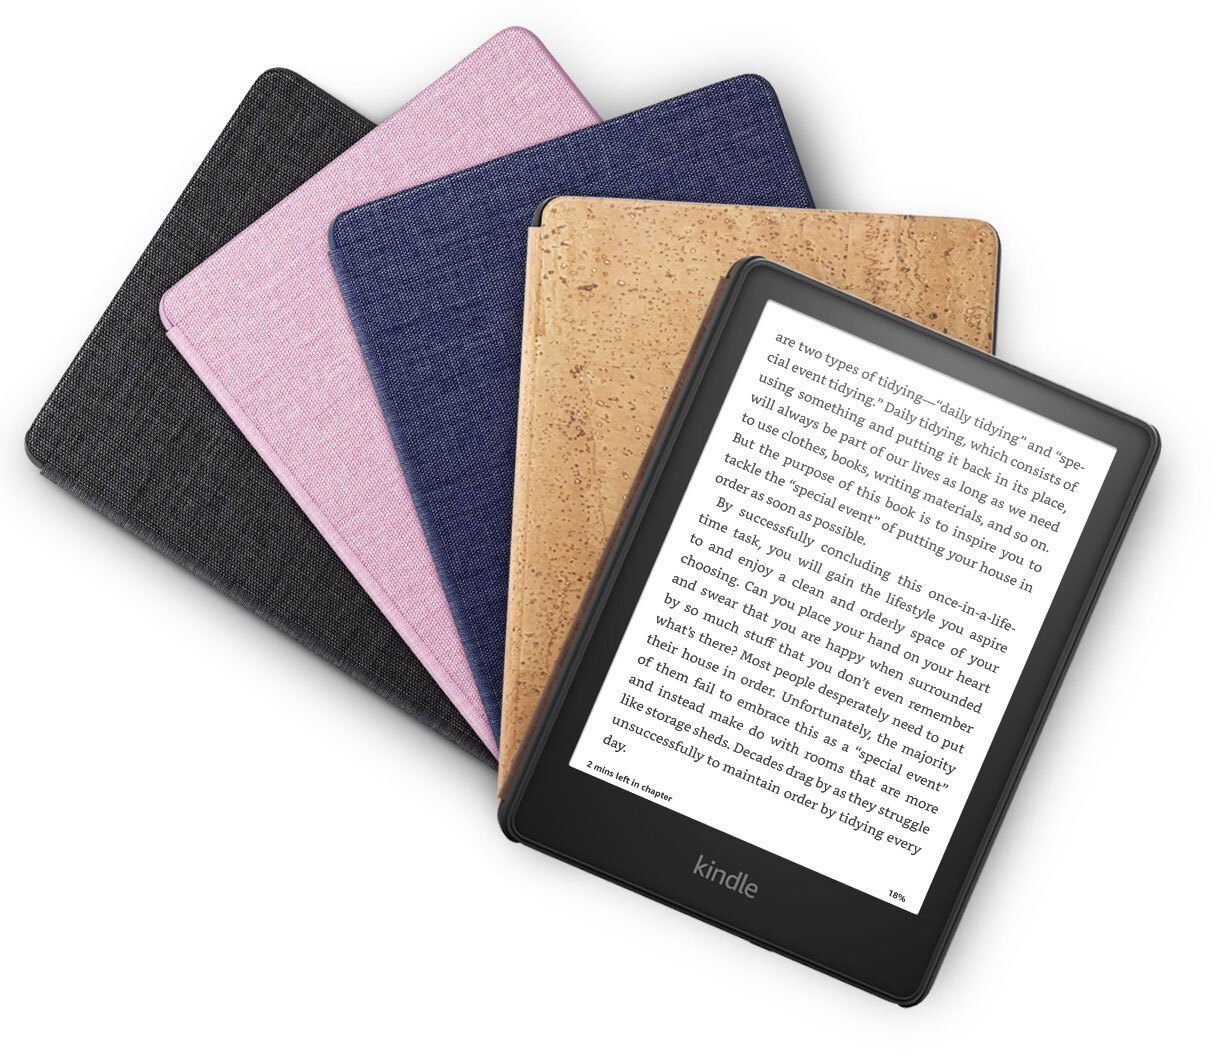 Amazon's Kindle Paperwhite returns with a bigger screen, USB-C and 